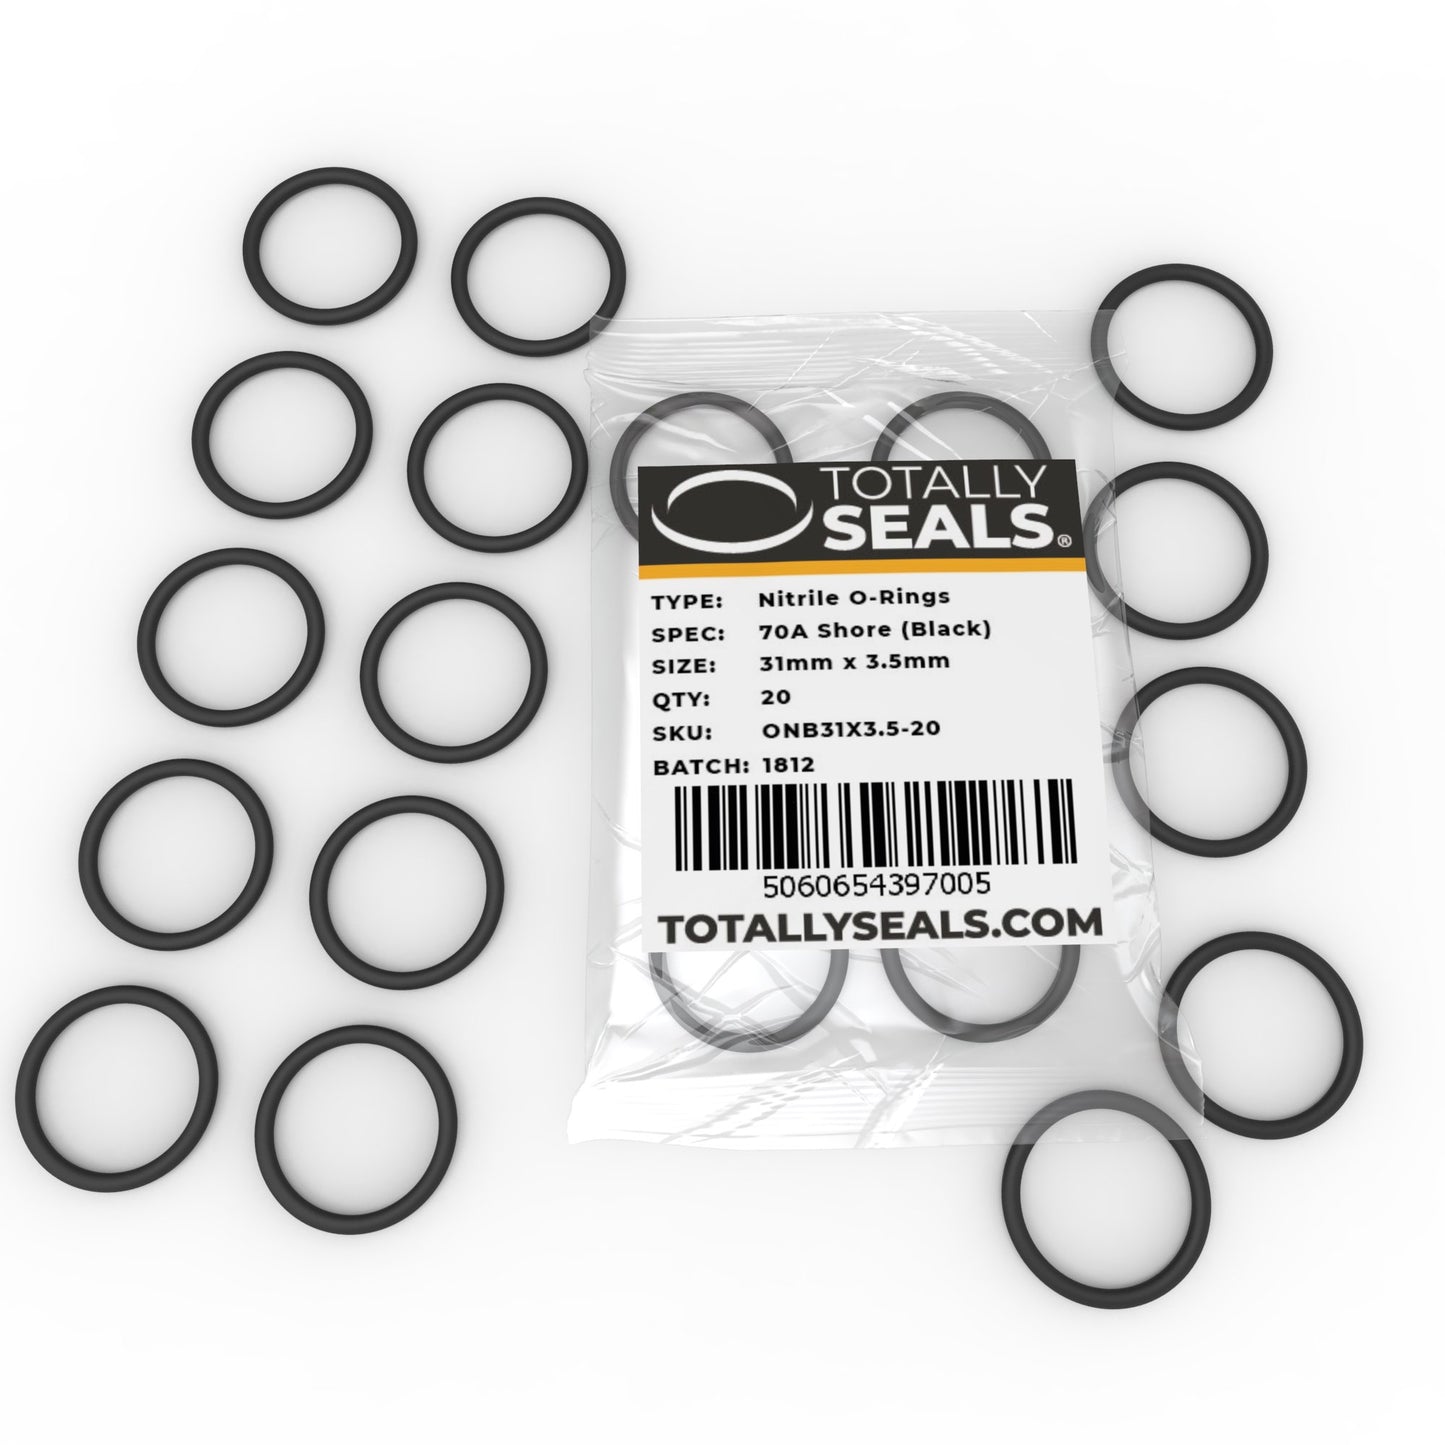 31mm x 3.5mm (38mm OD) Nitrile O-Rings - Totally Seals®